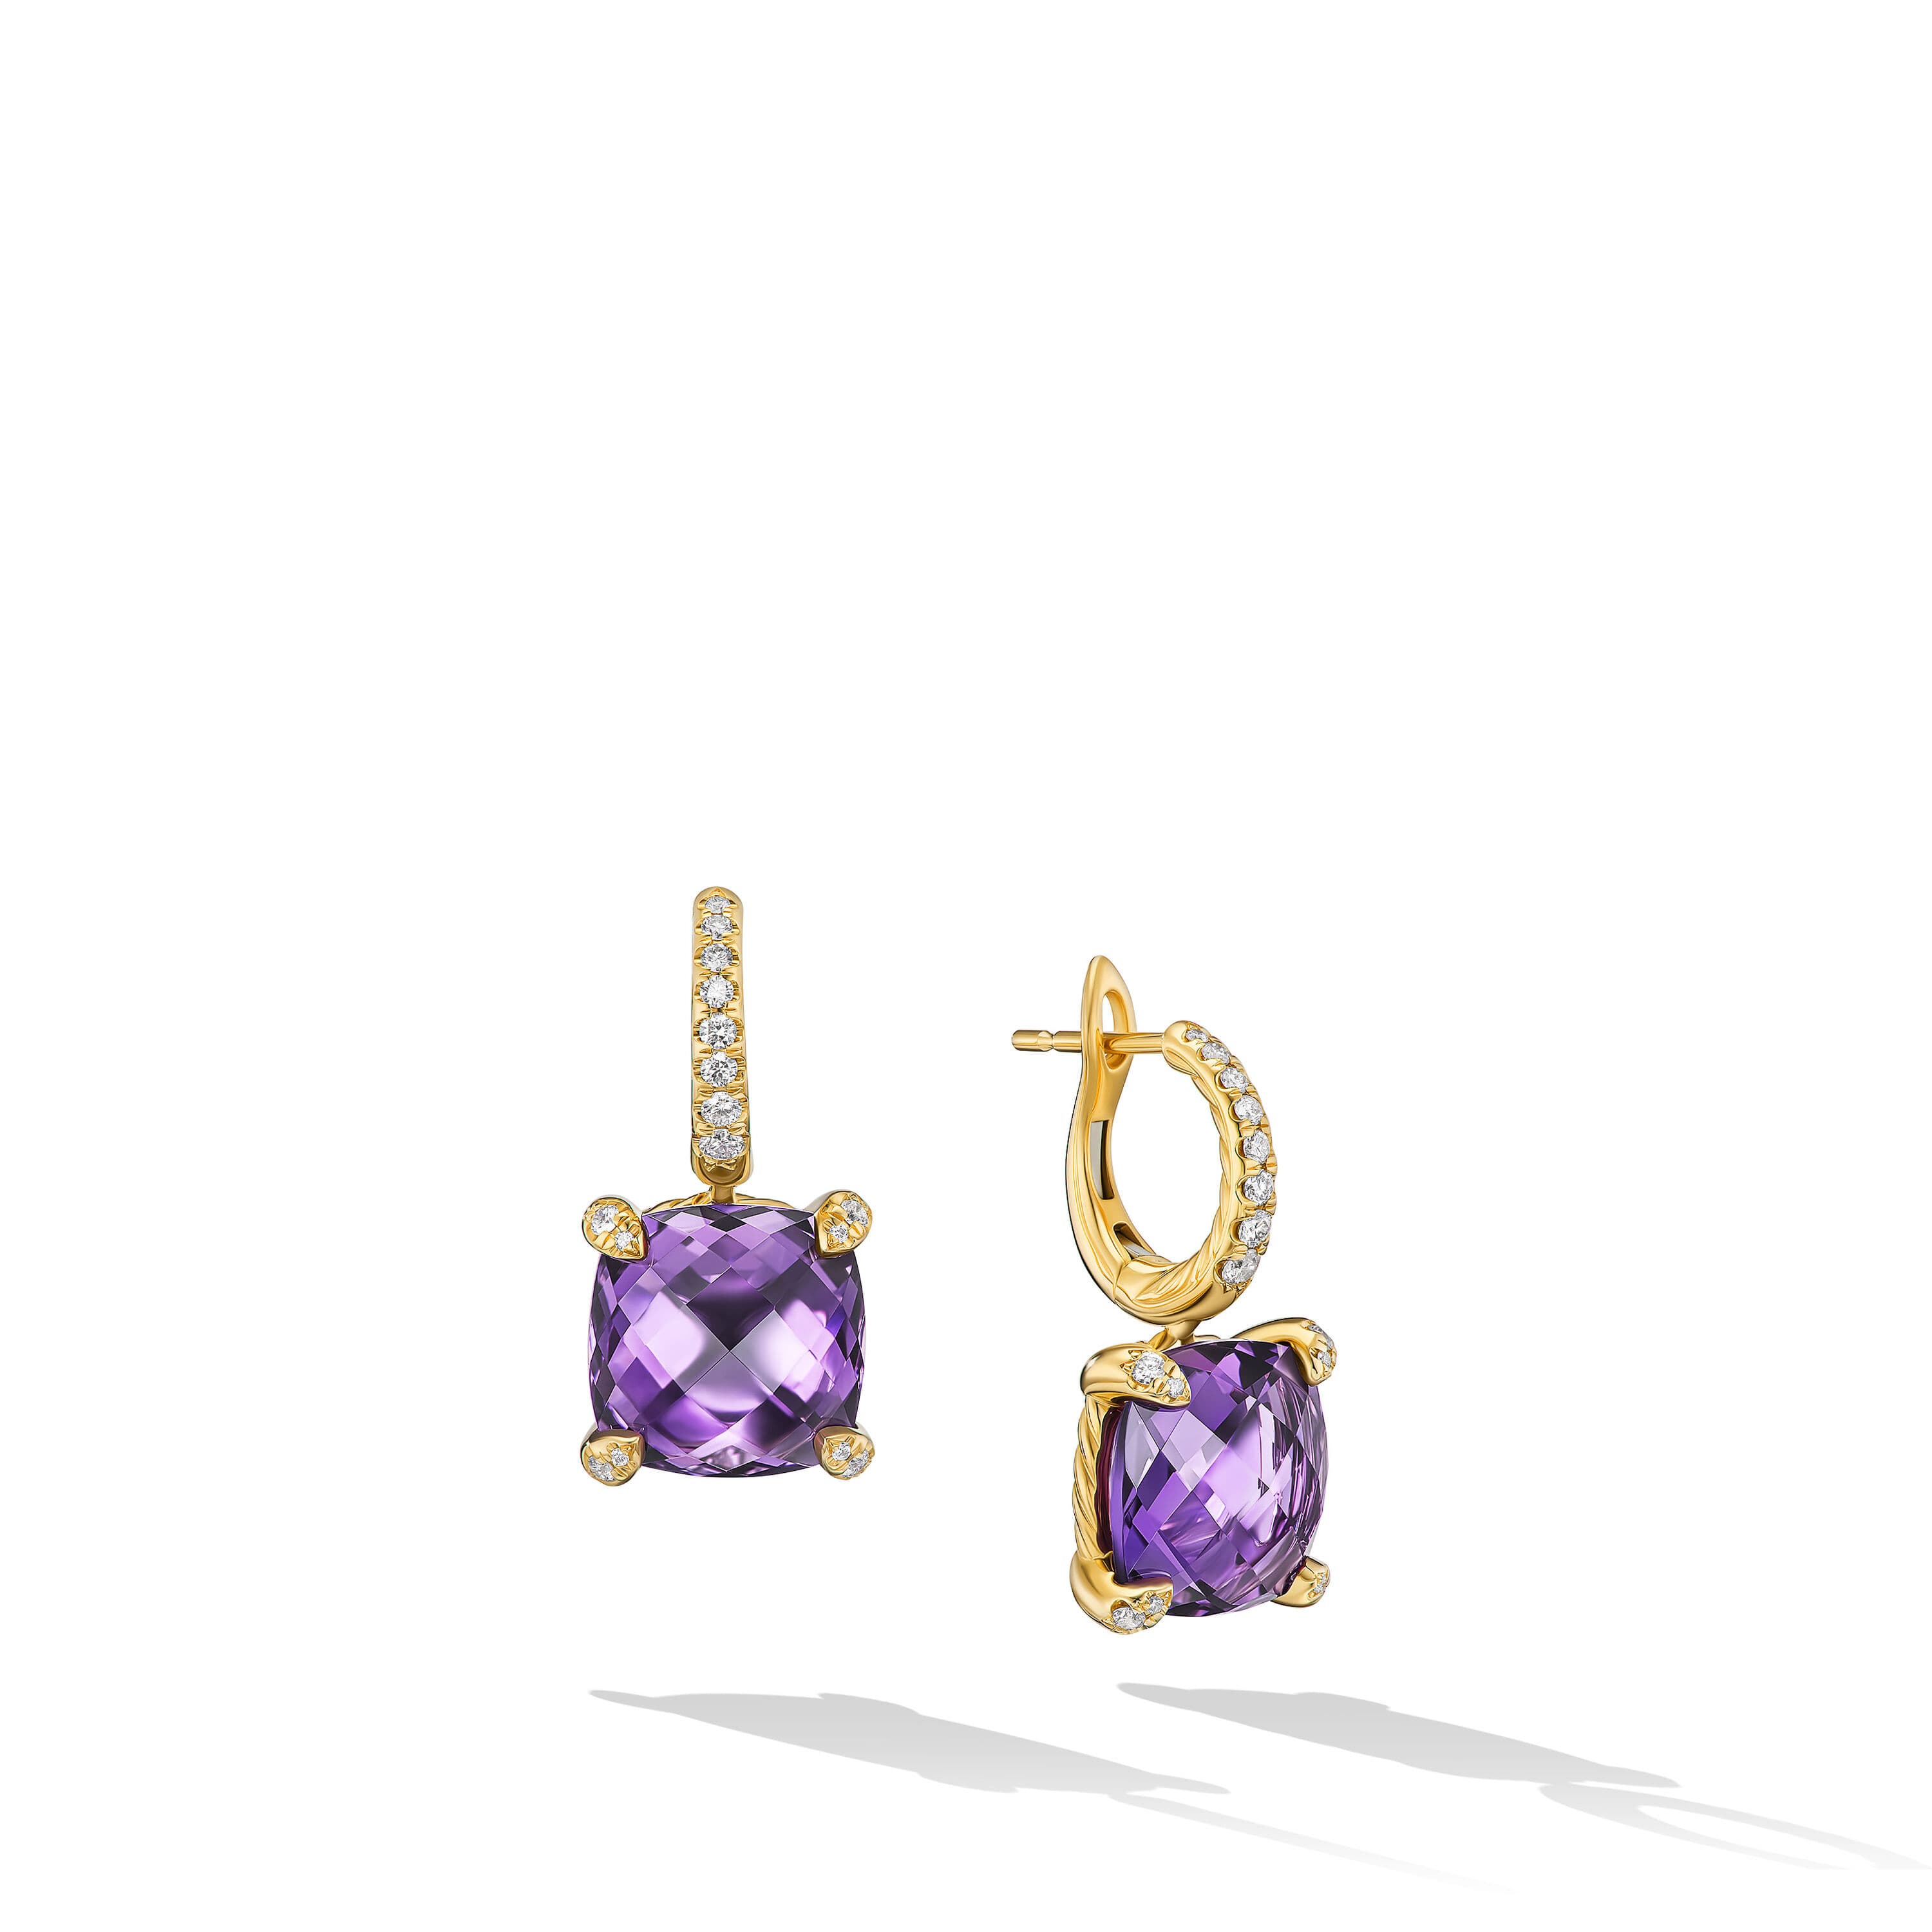 David Yurman Chatelaine Drop Earrings in Gold with Amethyst and Diamonds